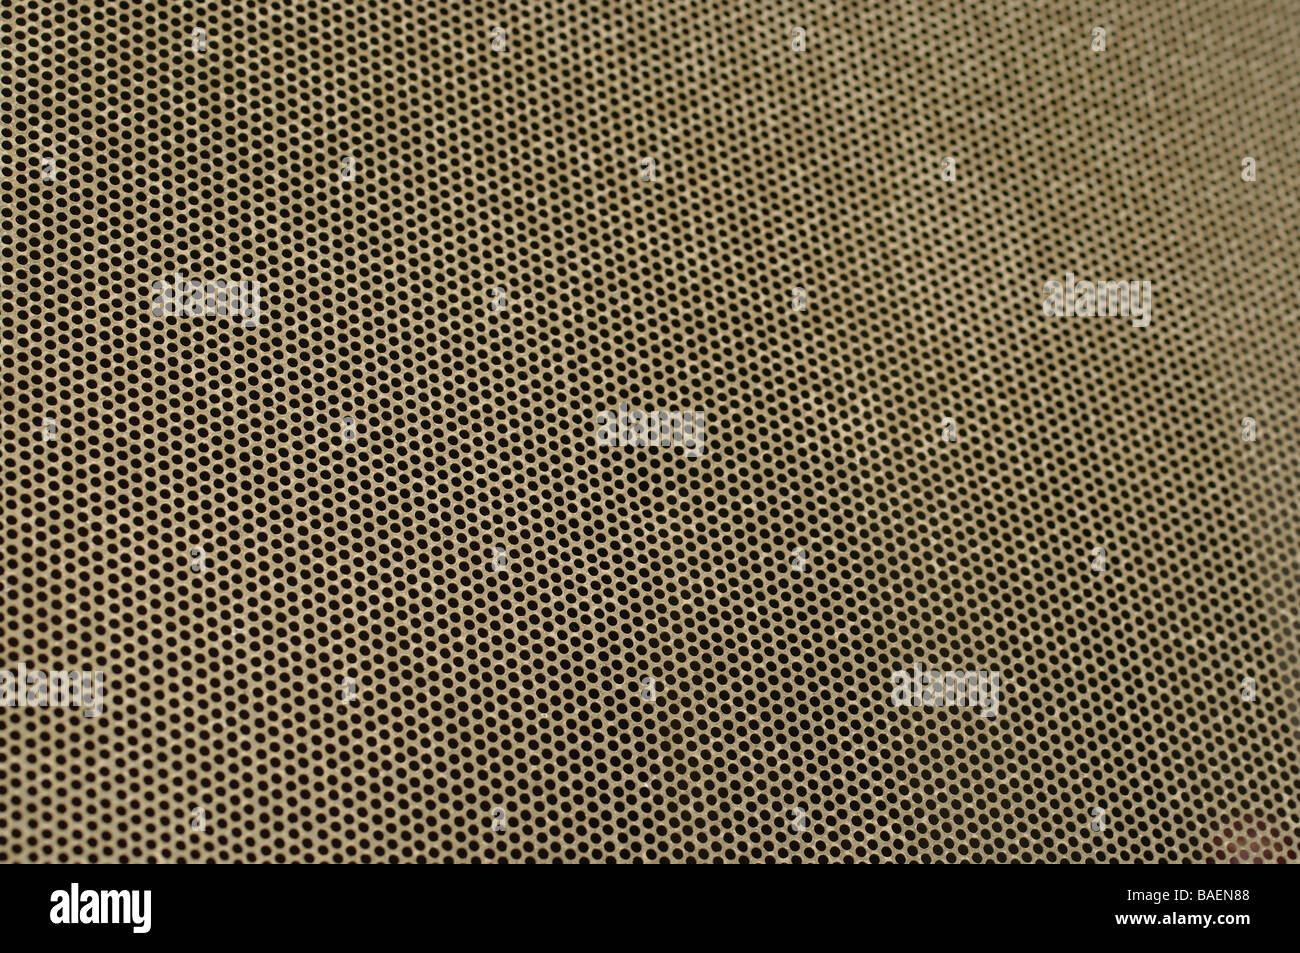 great image of an old brass metal mesh background Stock Photo - Alamy